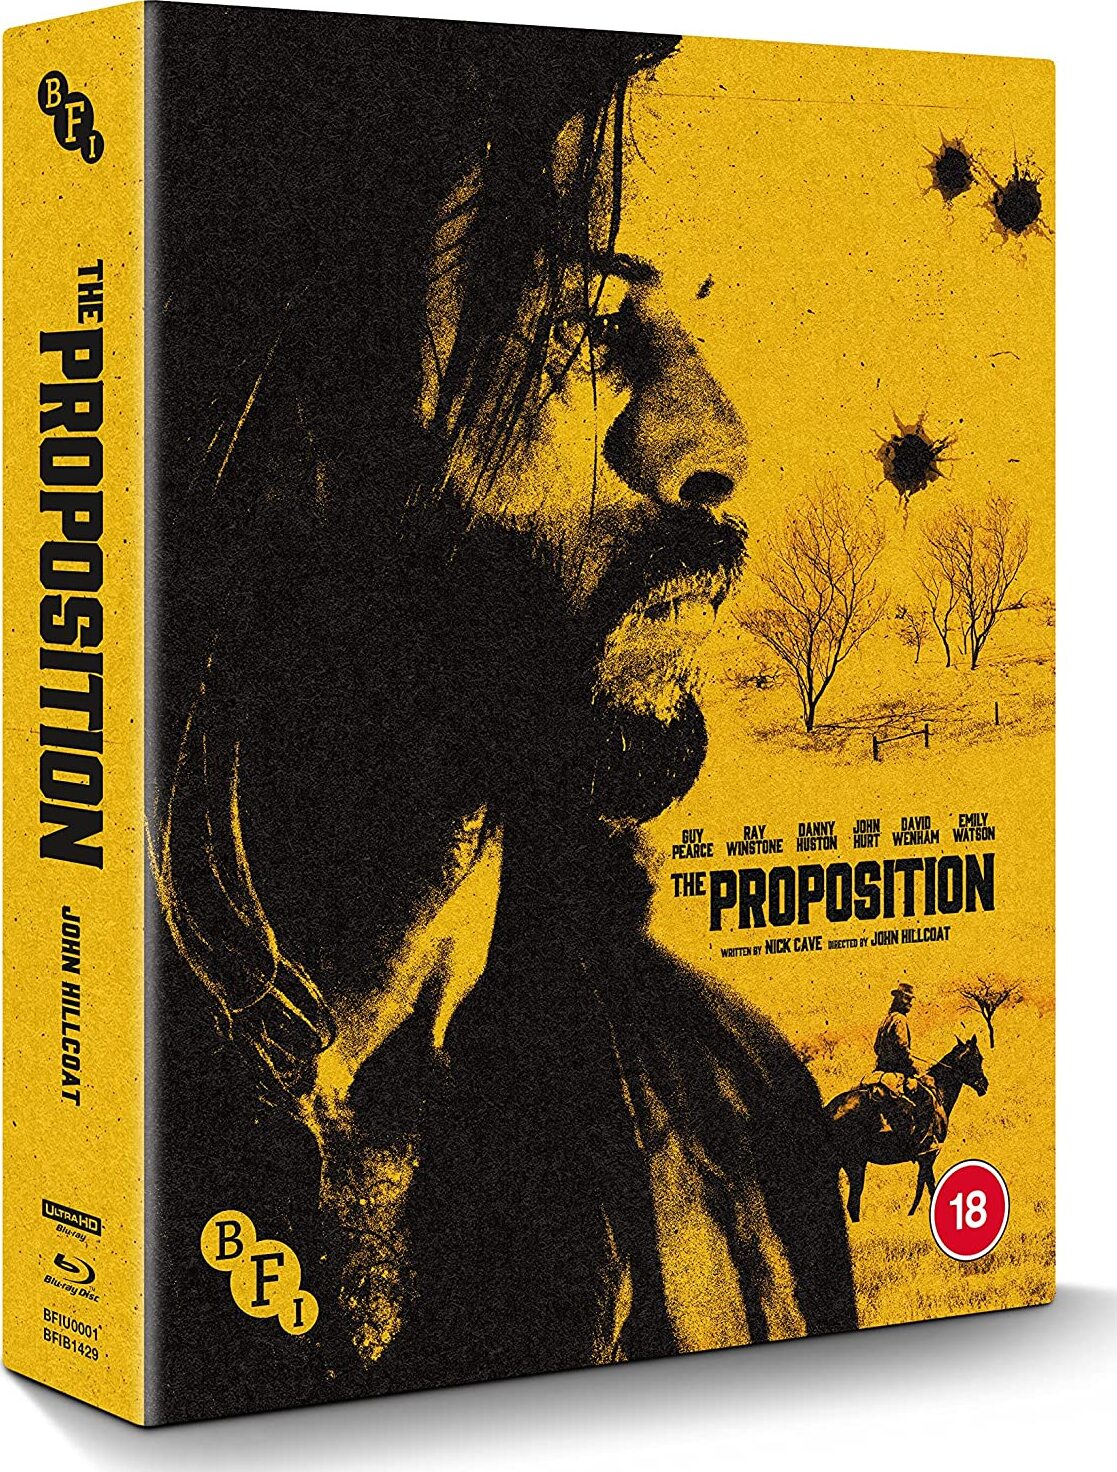 THE PROPOSITION (REGION FREE IMPORT - LIMITED EDITION) 4K UHD